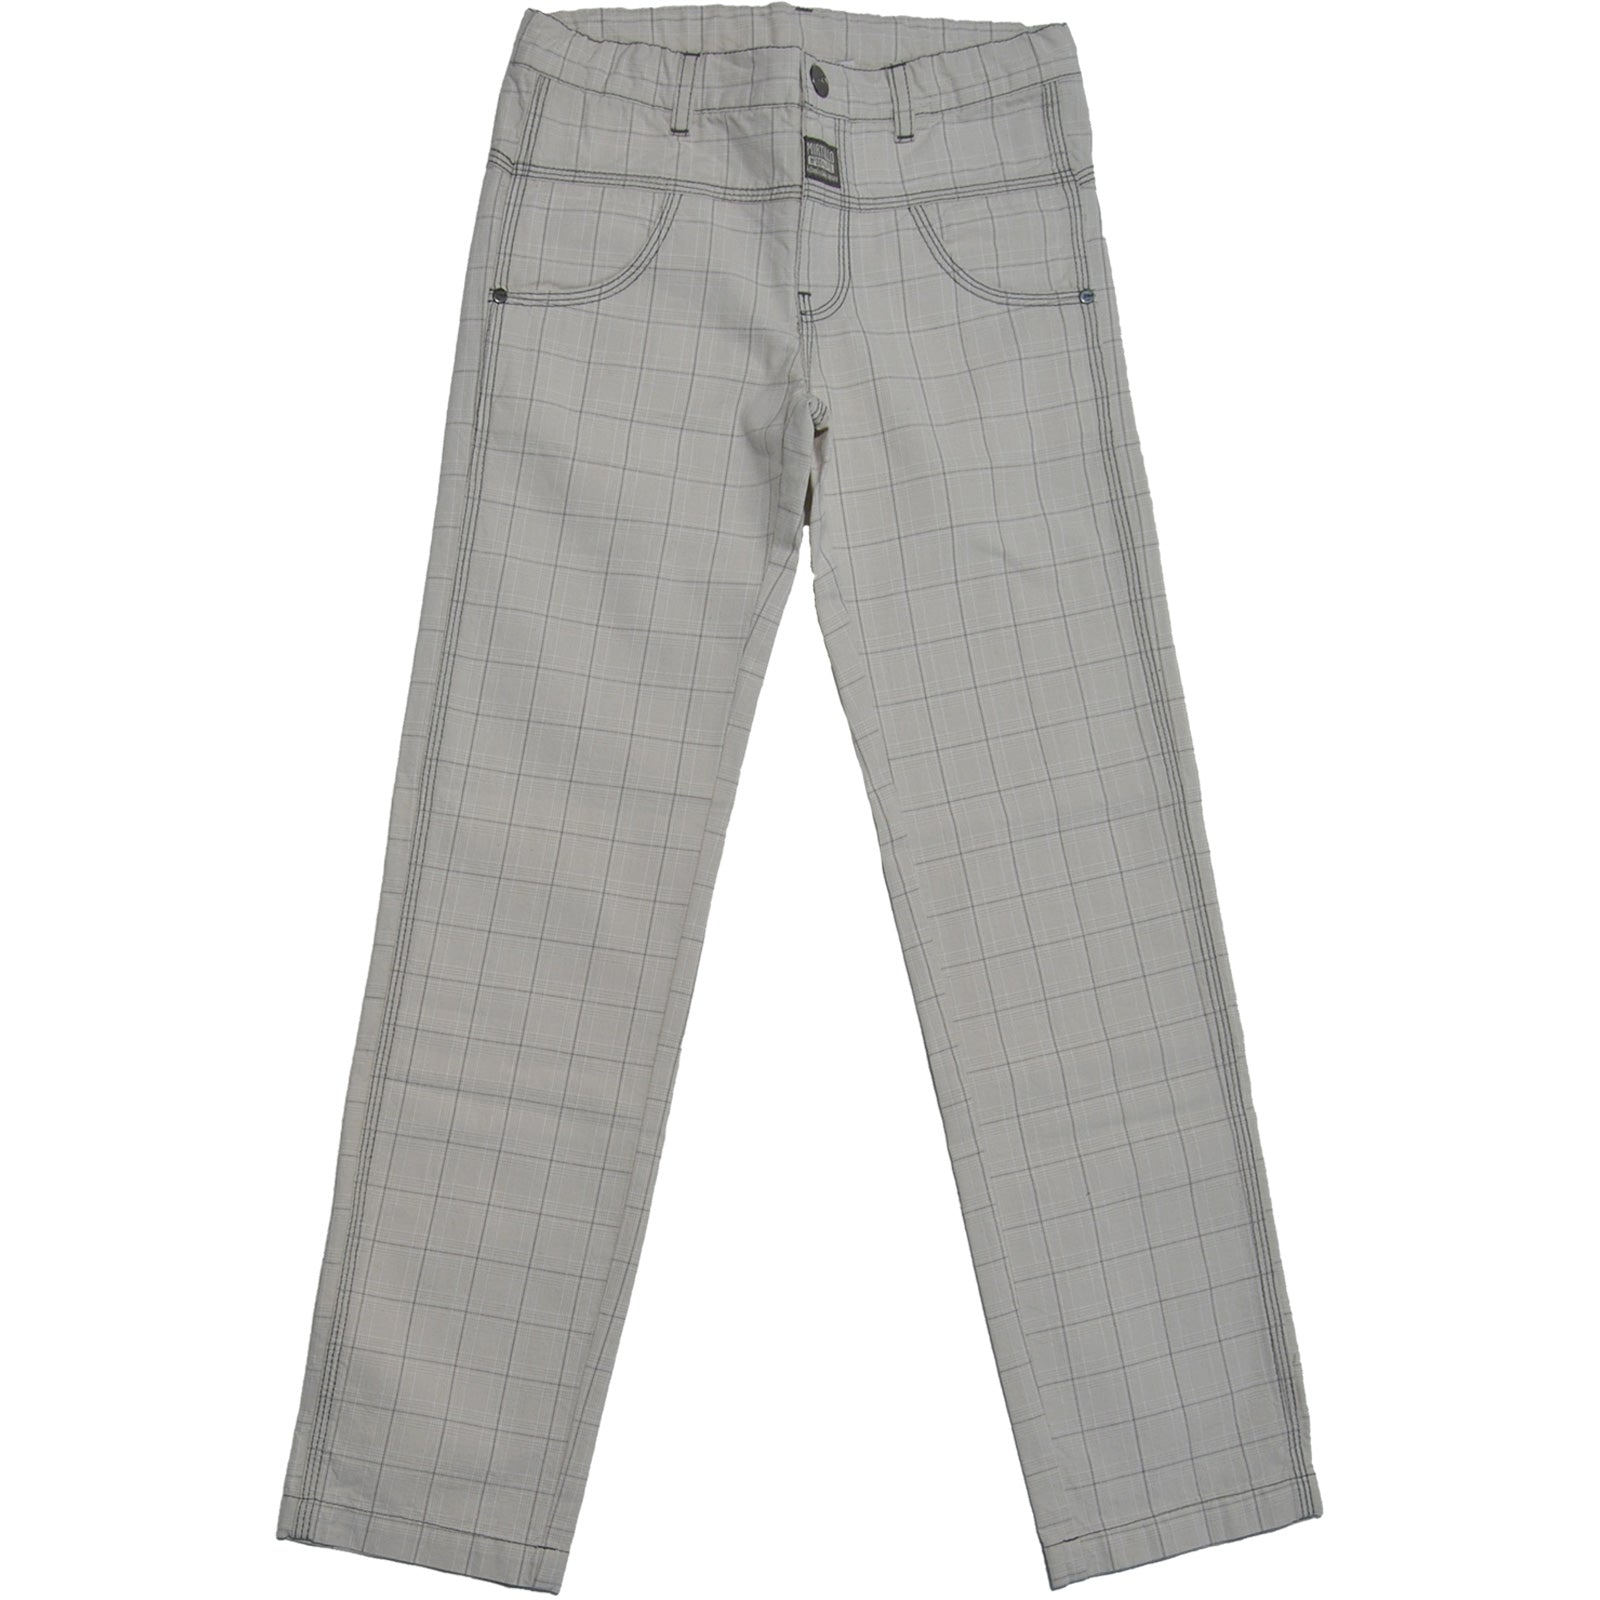 
  Prince of Wales trousers from the children's clothing line Mirtillo beige 4 pockets, adjustabl...